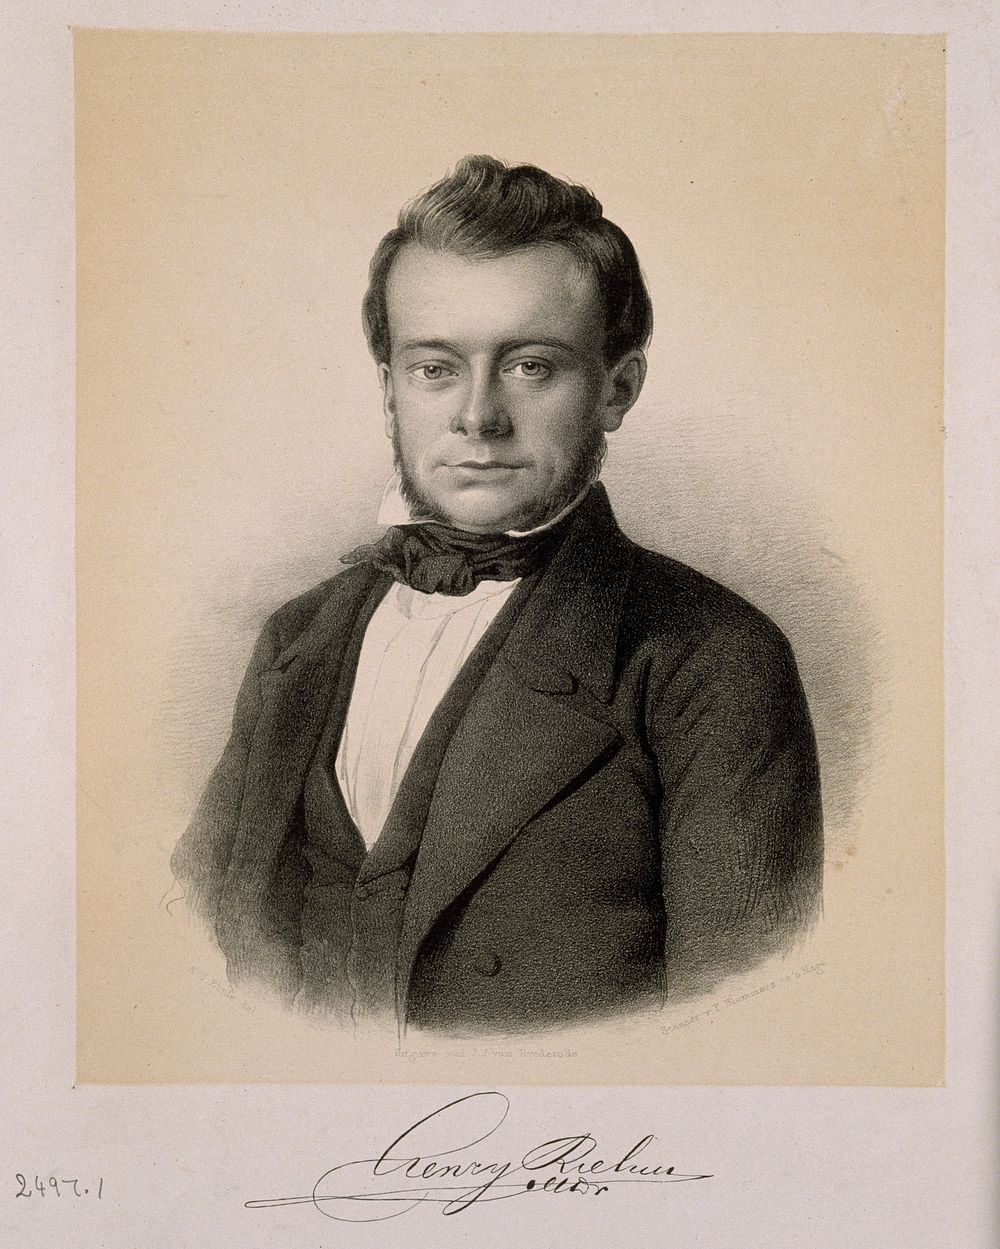 Christoph Hendrik Riehm. Lithograph by P. Blommers after A. J. Ehnle, 1853.